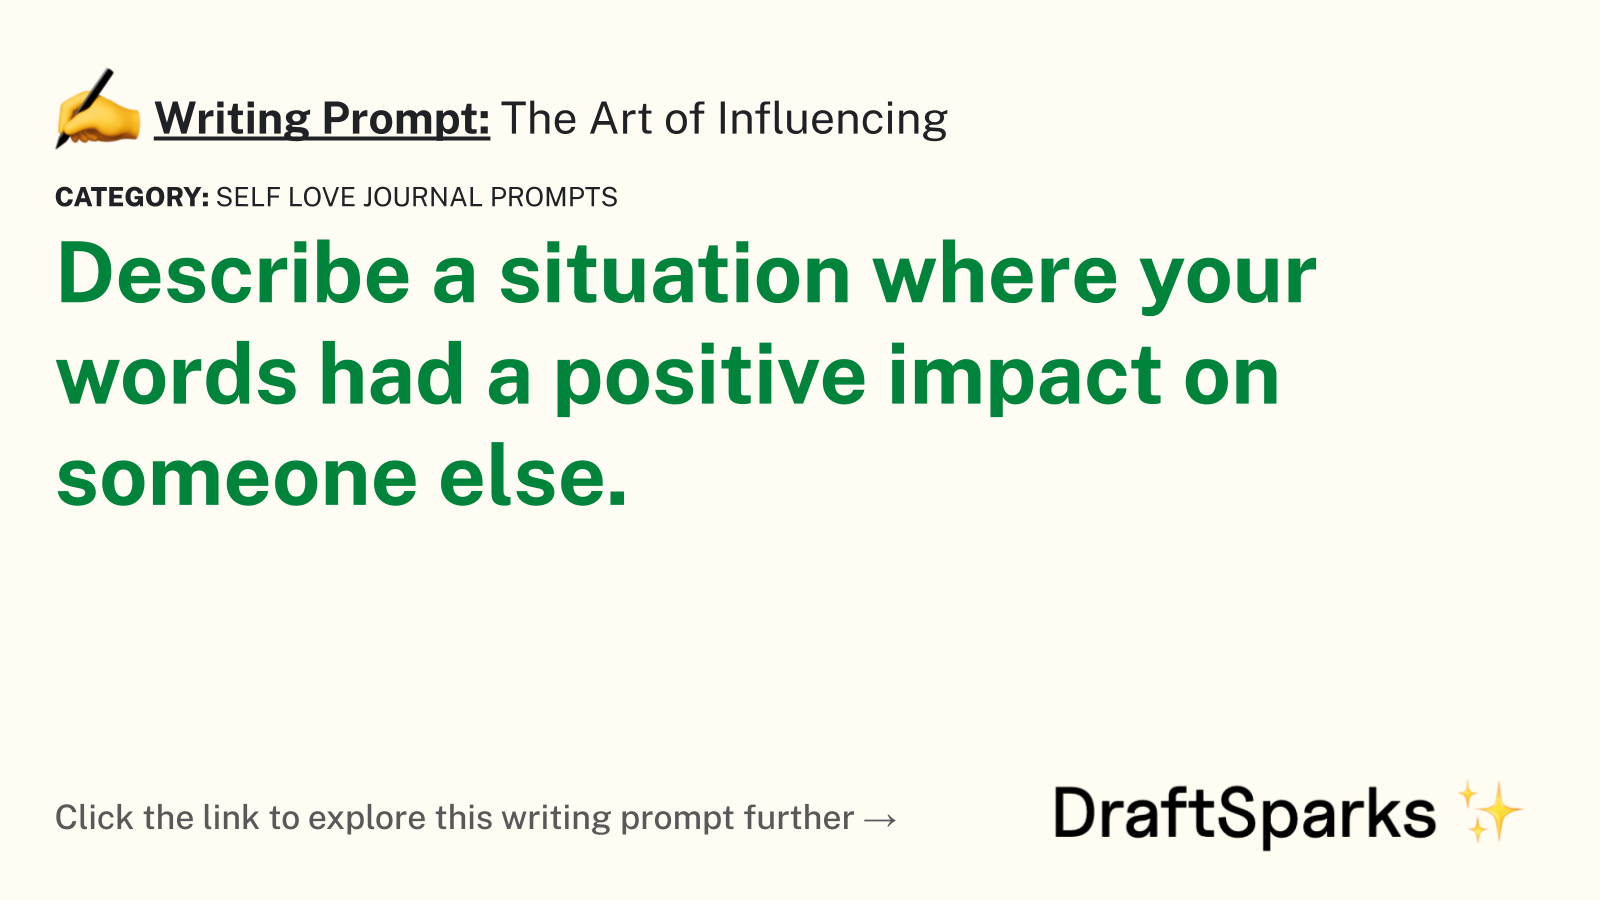 The Art of Influencing